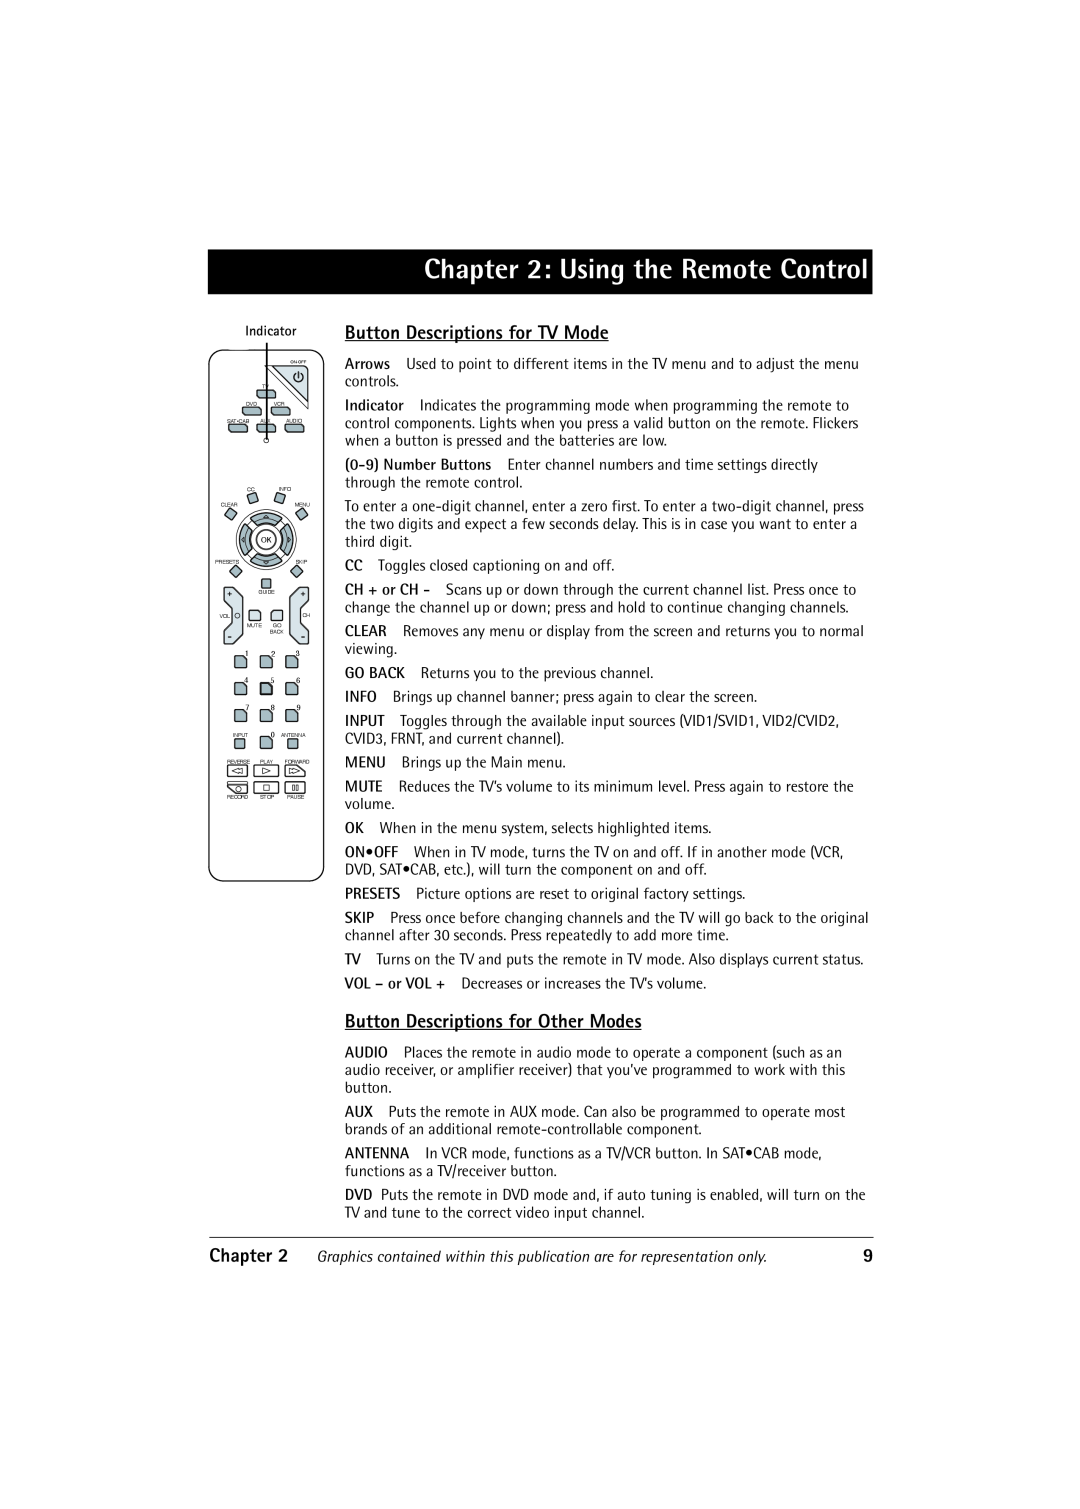 RCA 32F650T manual Using the Remote Control, Button Descriptions for TV Mode, Button Descriptions for Other Modes, Chapter 